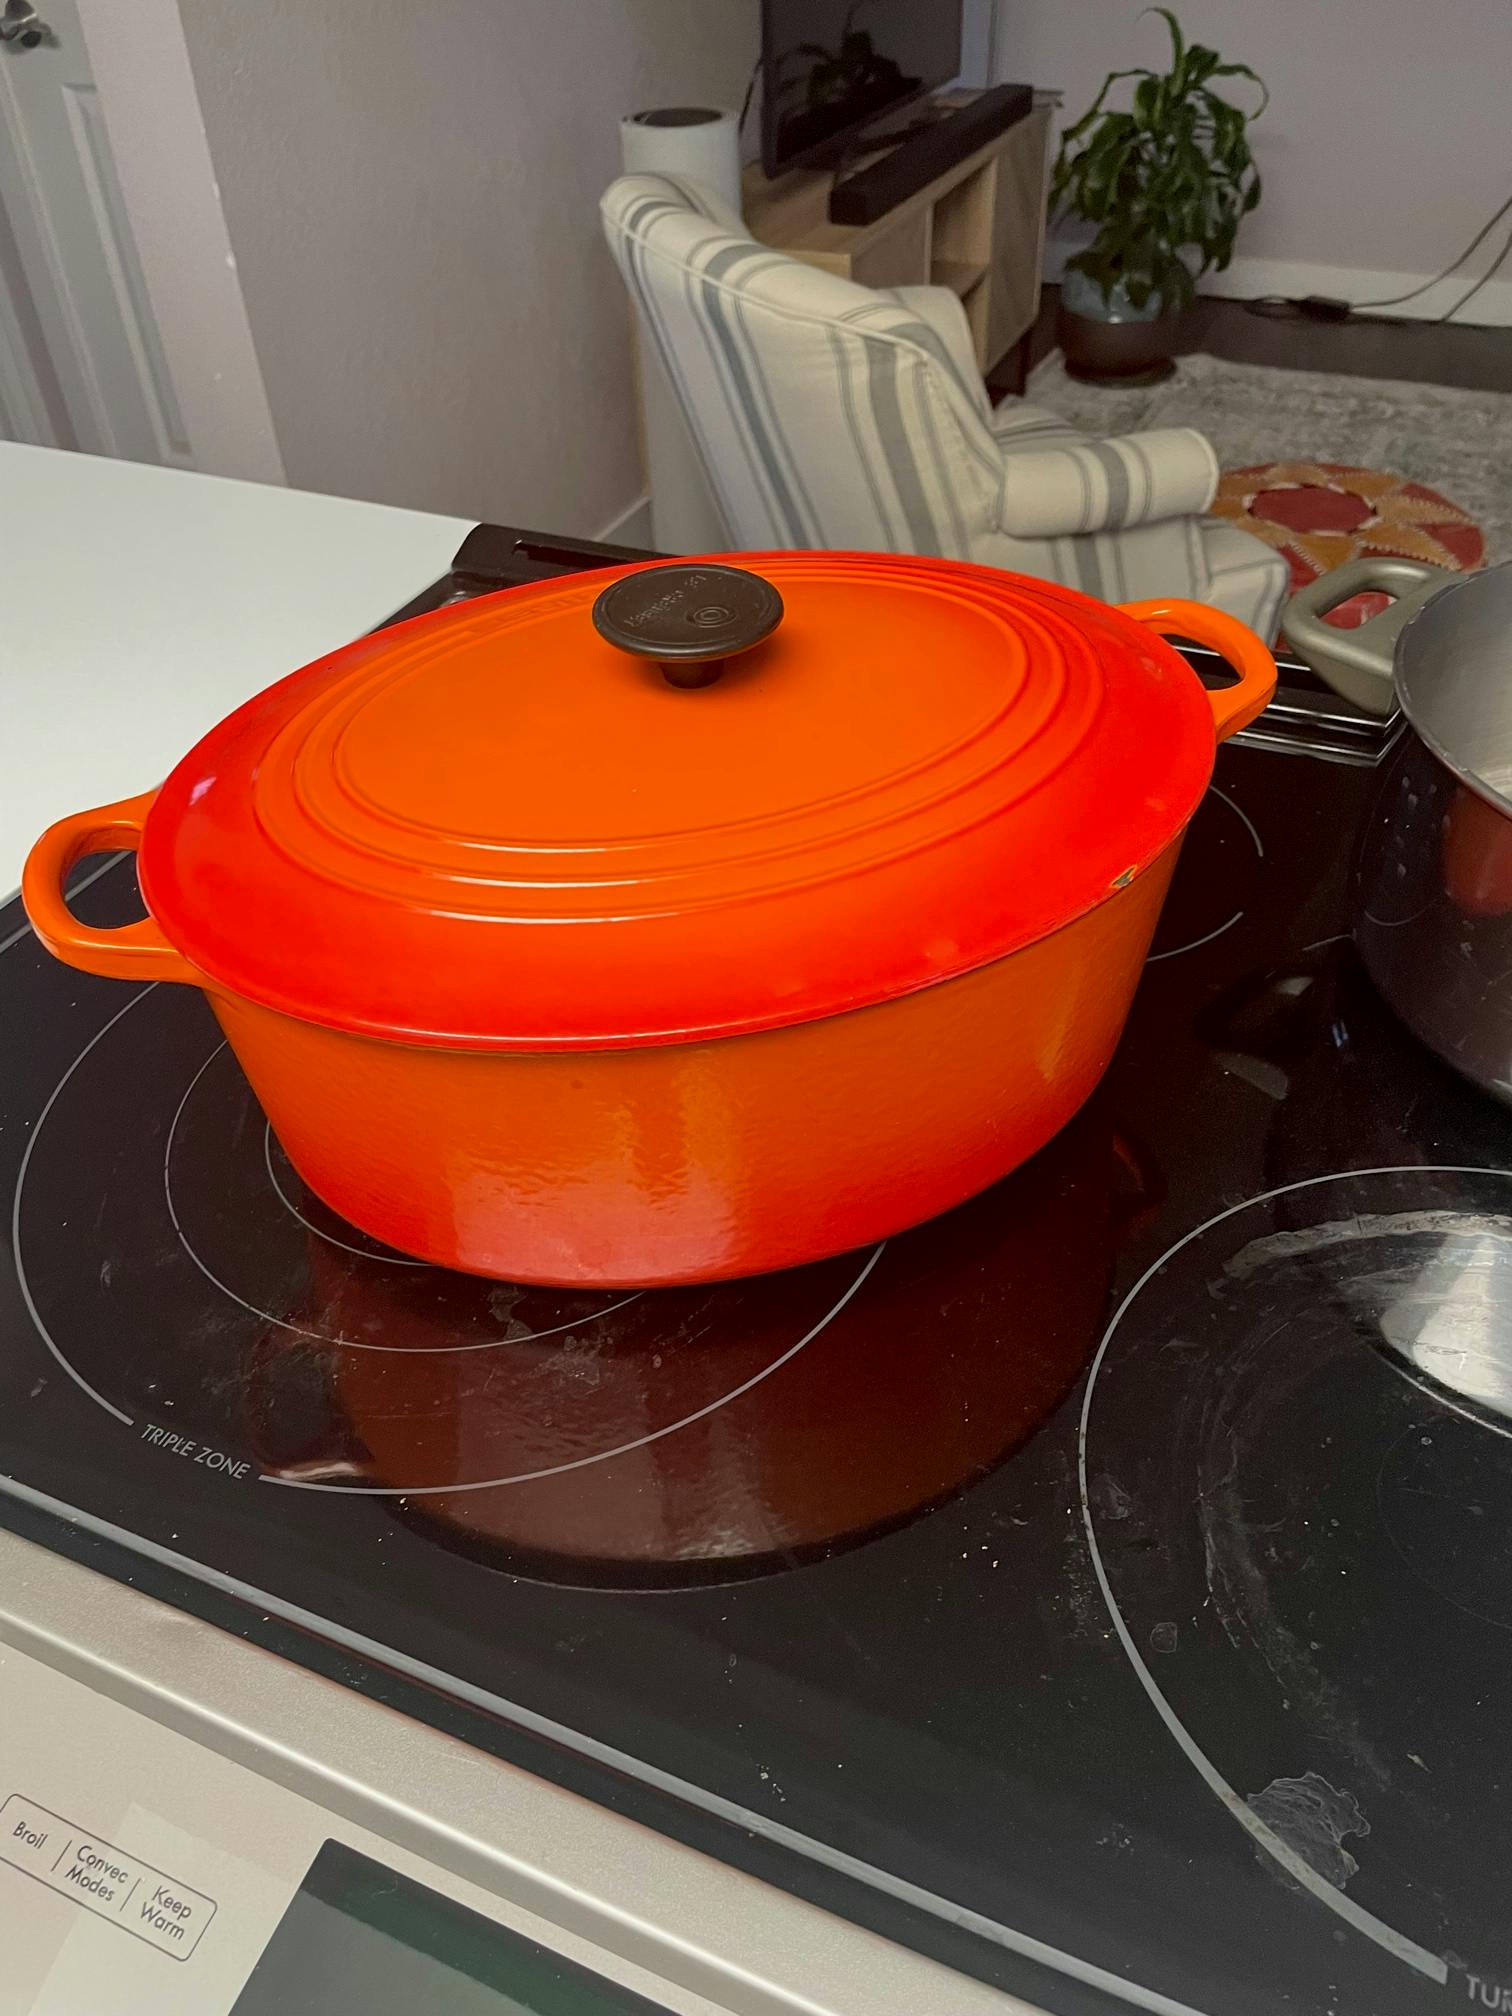 How Le Creuset went from French kitchen staple to global hit